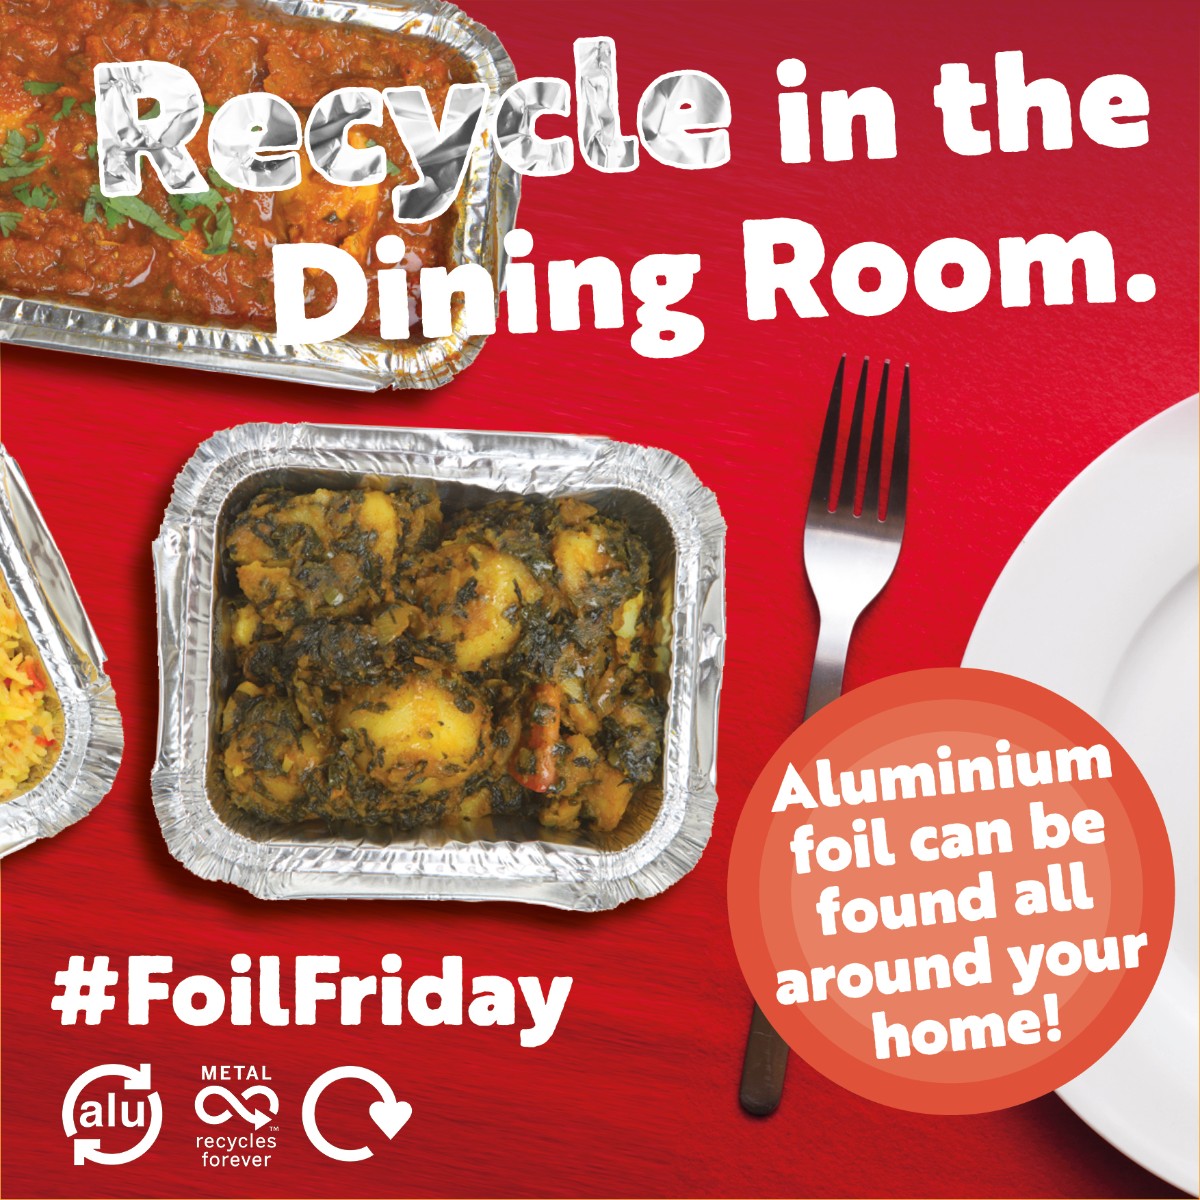 It's Foil Friday - you can find and recycle foil all around your home. Save up smaller bits and scrunch them into a ball to be sure they will be be picked out at the recycling centre. ♻ #FoilFriday